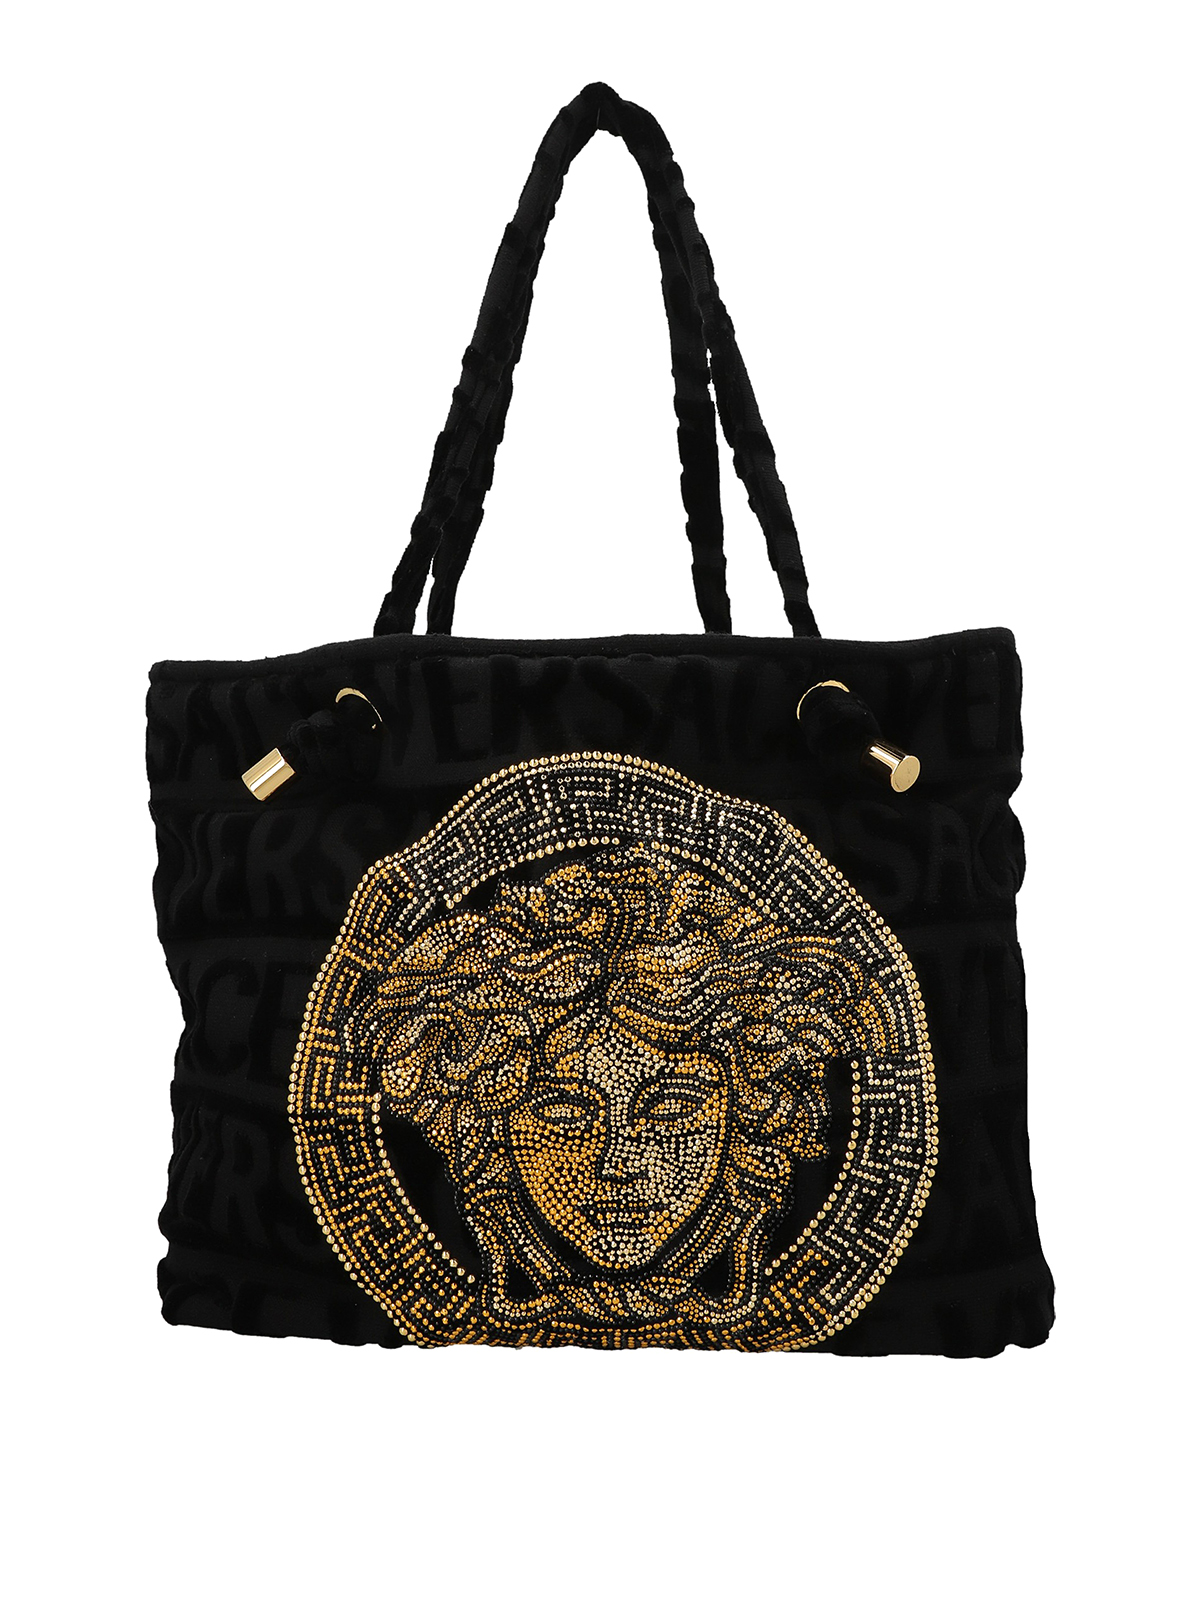 Cheap versace AAA+ Bags OnSale, Discount versace AAA+ Bags Free Shipping!